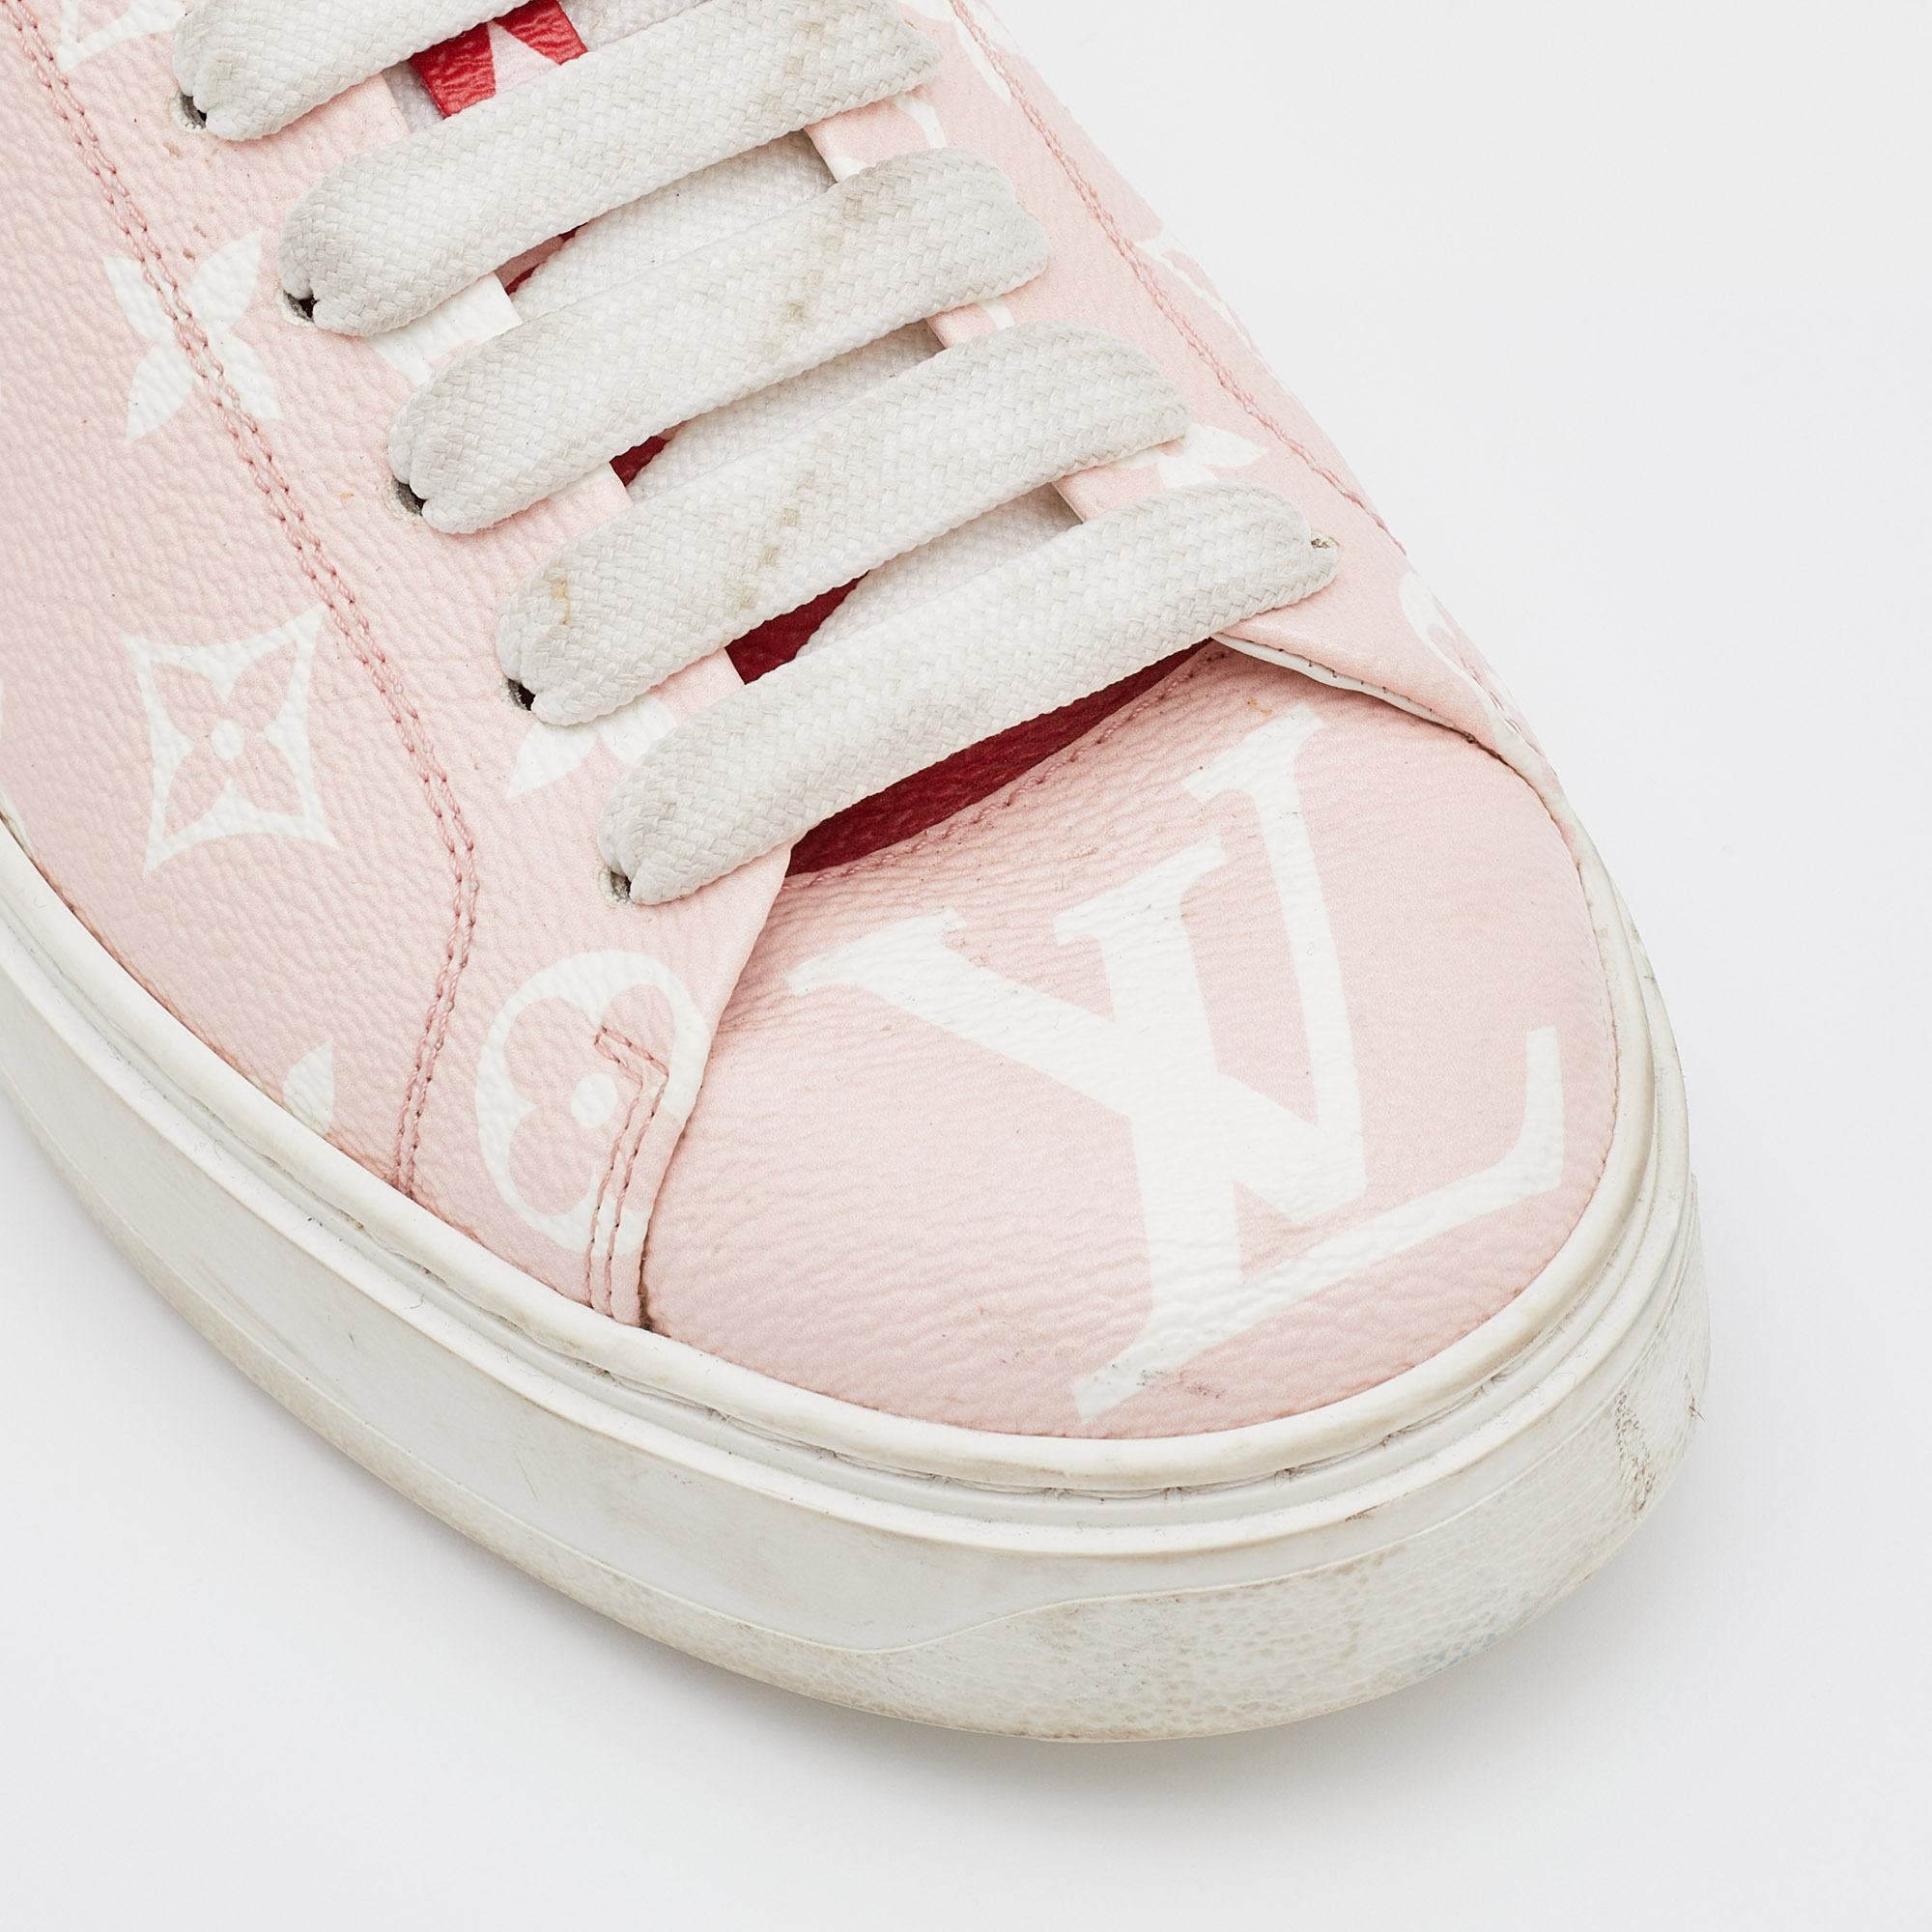 LOUIS VUITTON Monogram By The Pool Time Out Sneakers 38.5 Rose 802891